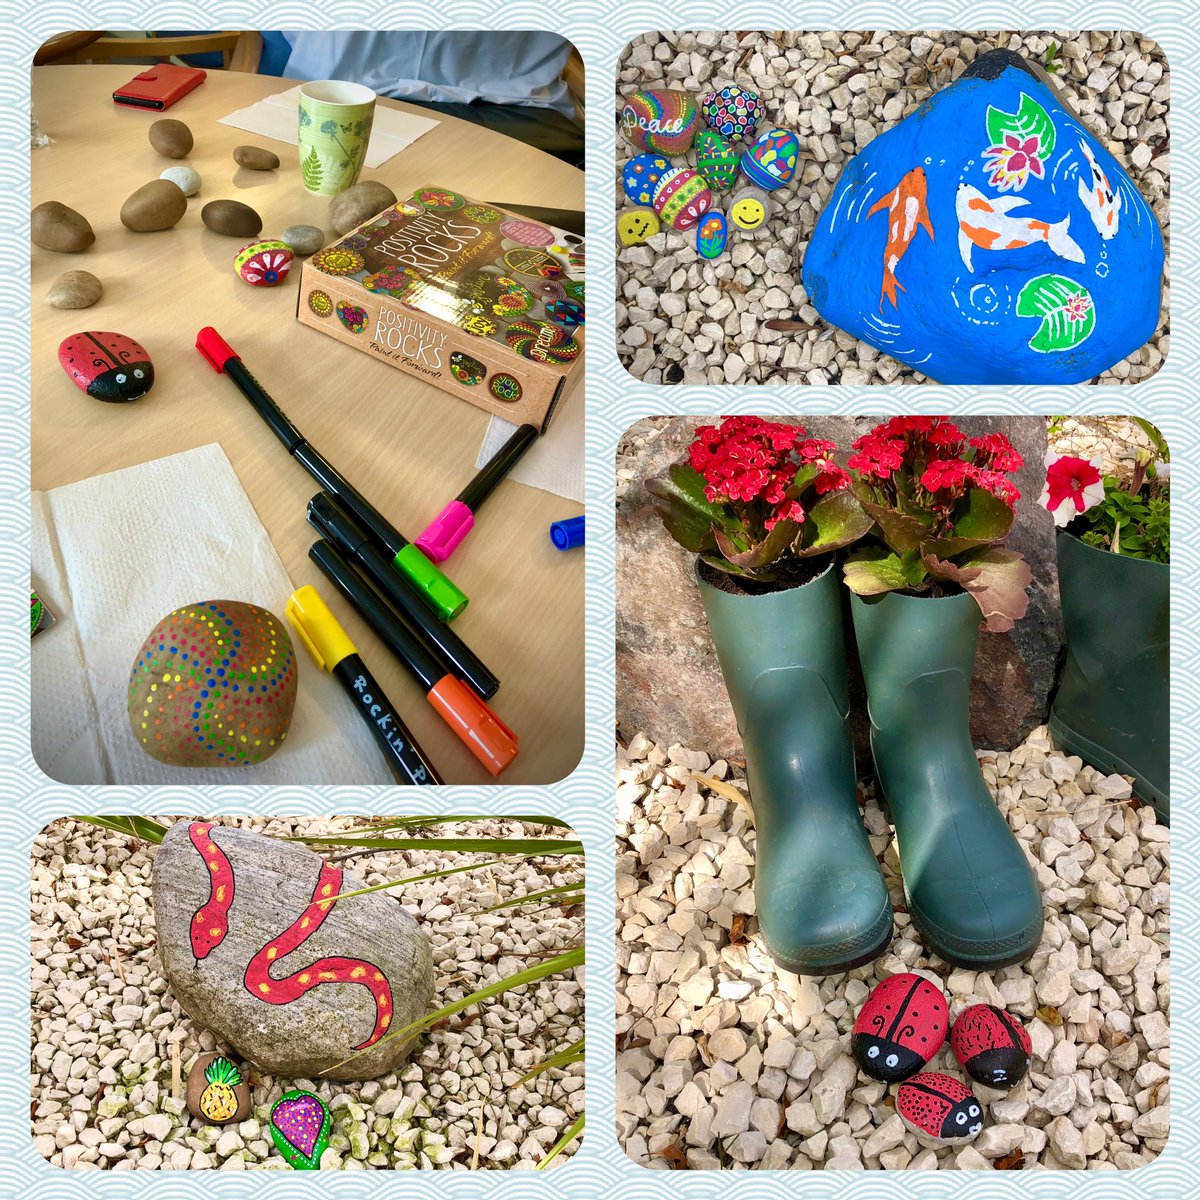 Our patients have been helping to make the therapy garden even more colourful!🐠🐞🐍🌈 @LPTnhs @LPT_Activities @CHSInpatientLPT